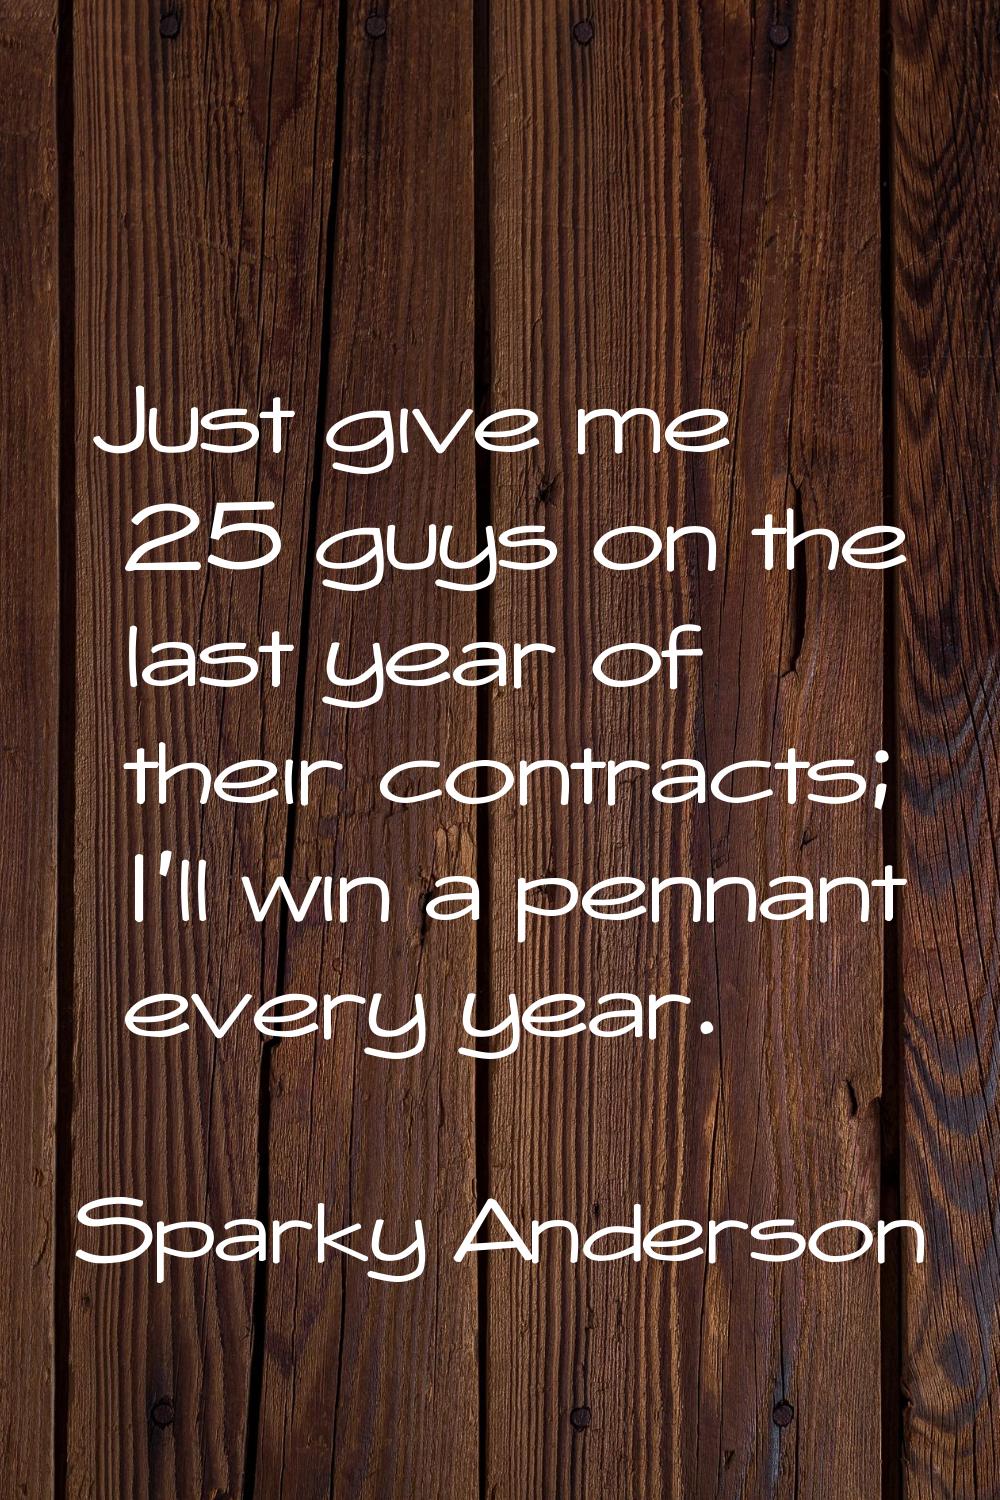 Just give me 25 guys on the last year of their contracts; I'll win a pennant every year.